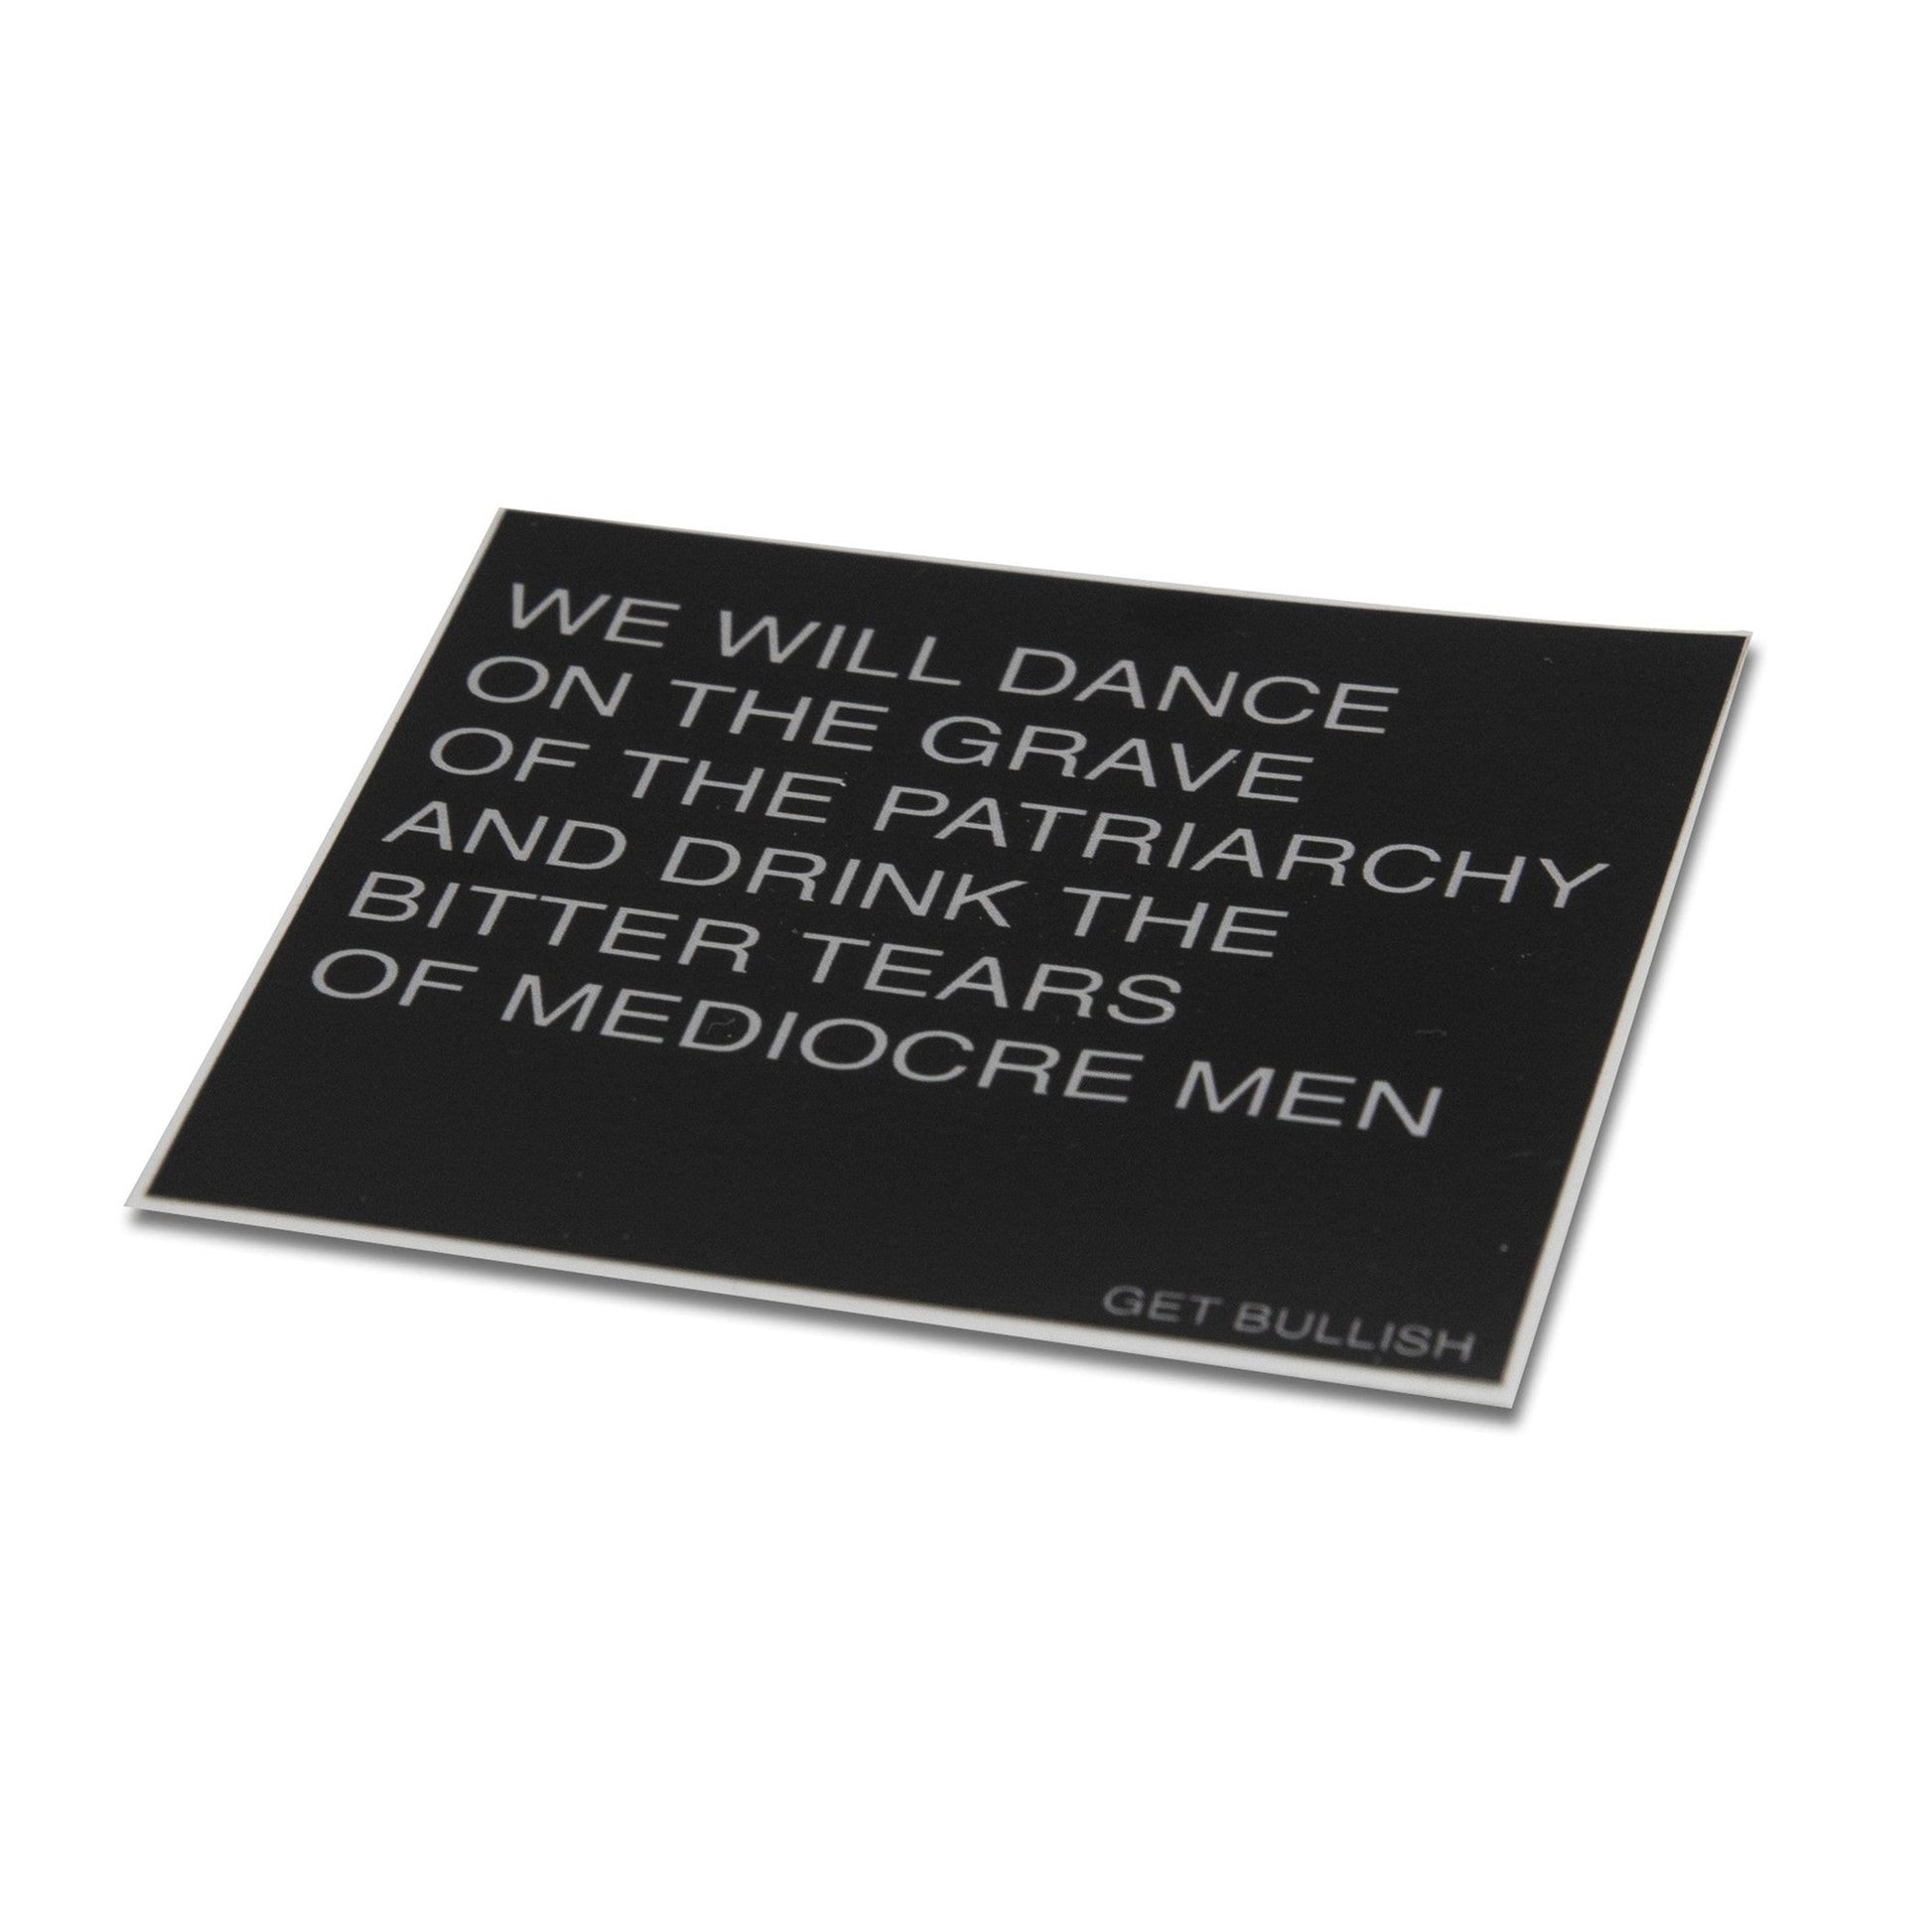 Dance on the Grave of the Patriarchy and Drink the Bitter Tears of Mediocre Men Sticker in Black and Dove Gray